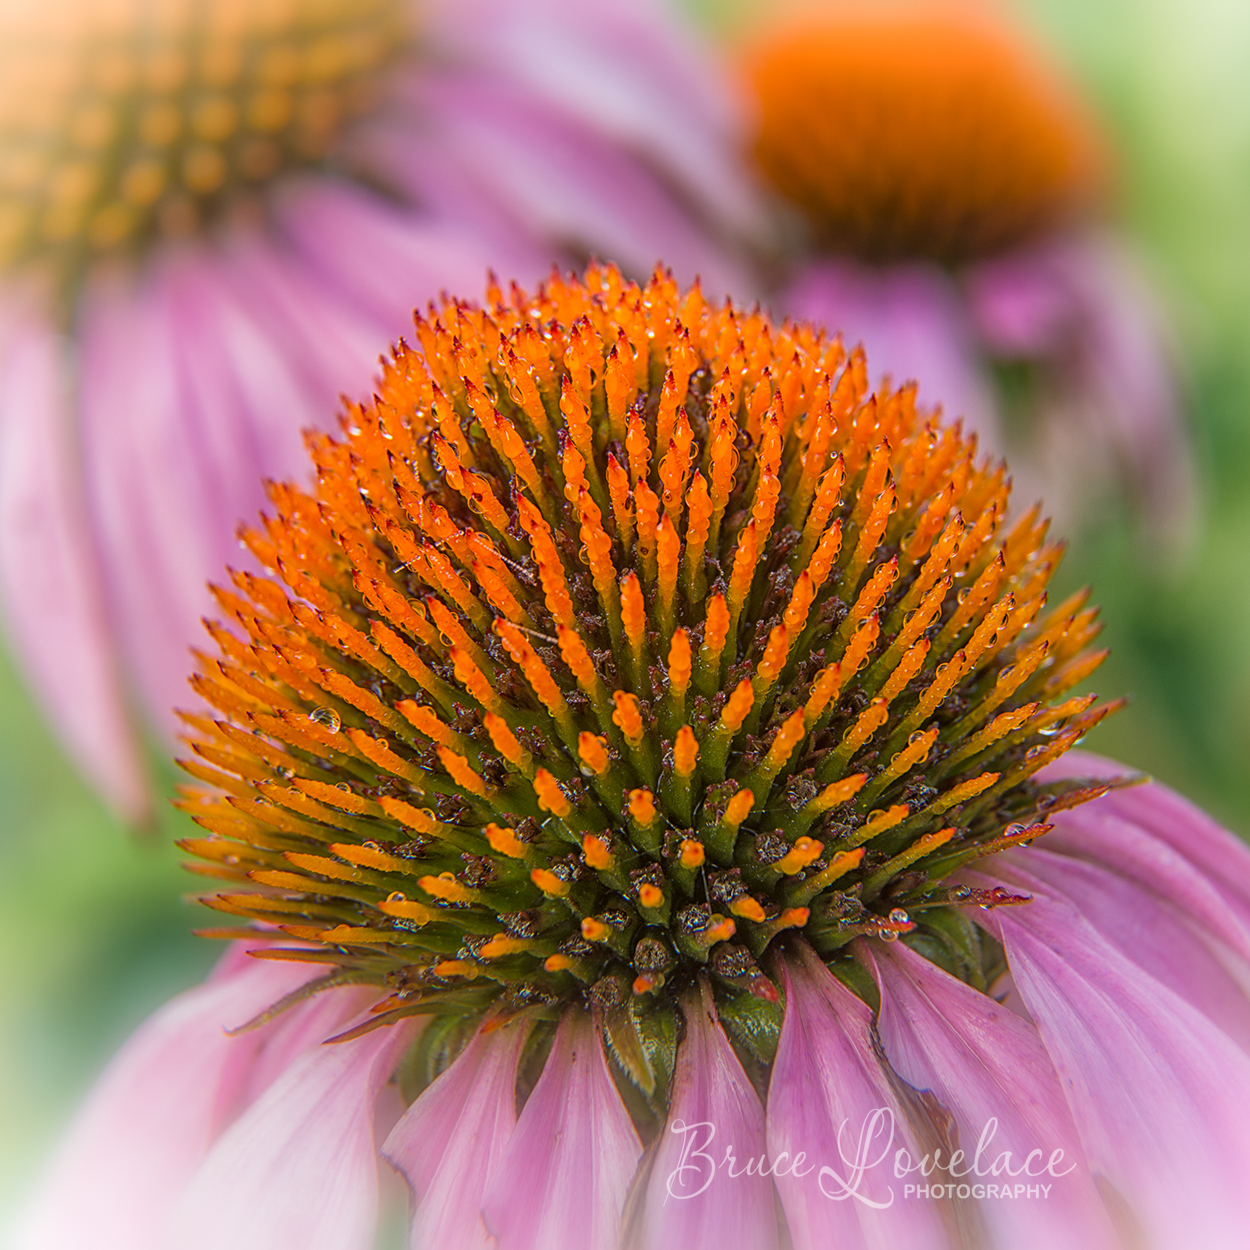 Flower photo with extension tubes